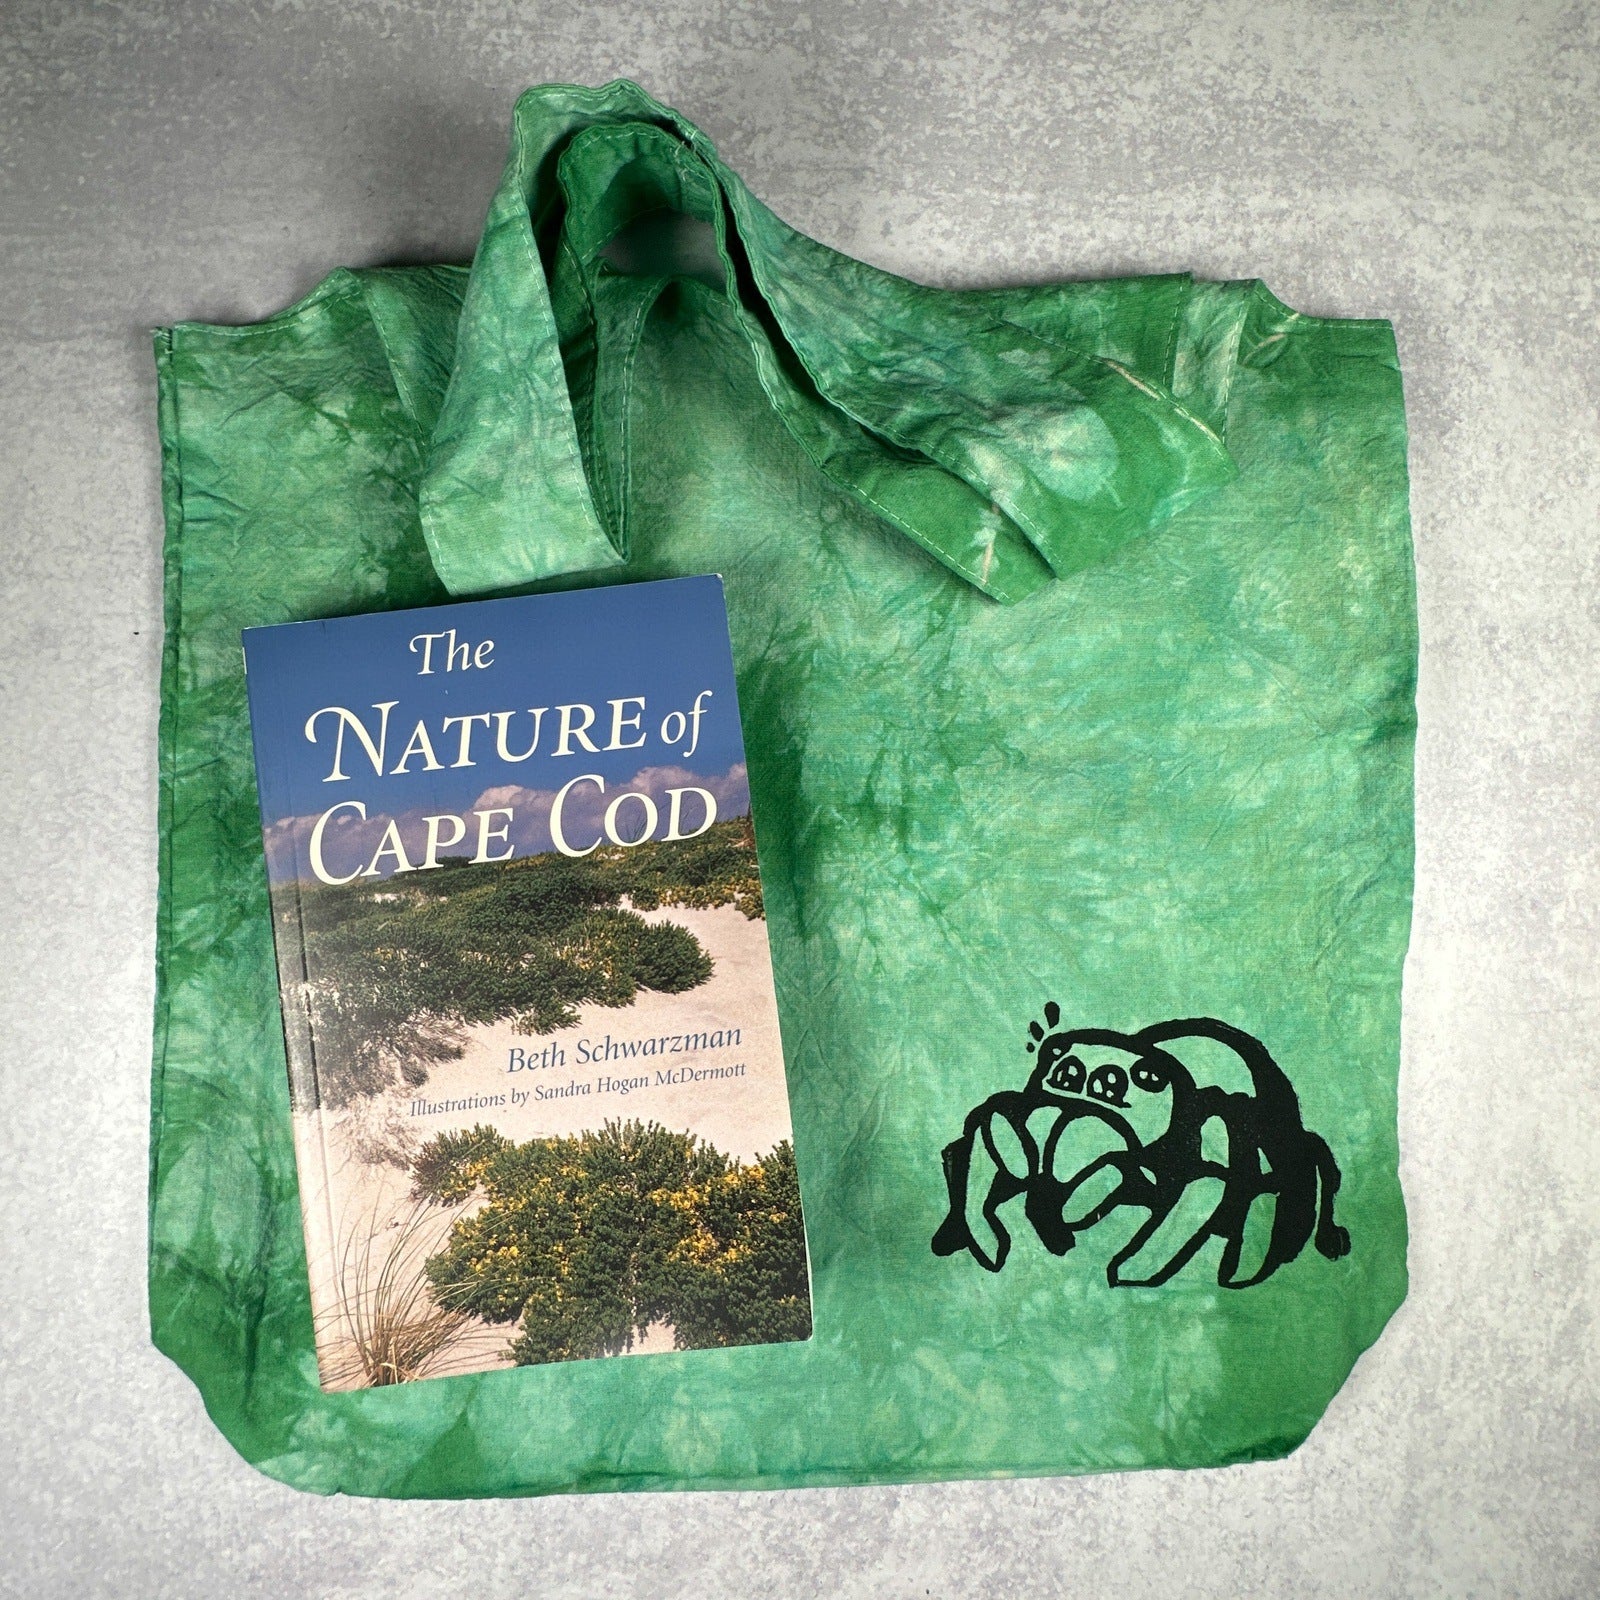 Green Tie-dye Jumping Spider Tote Bag - The Serpentry